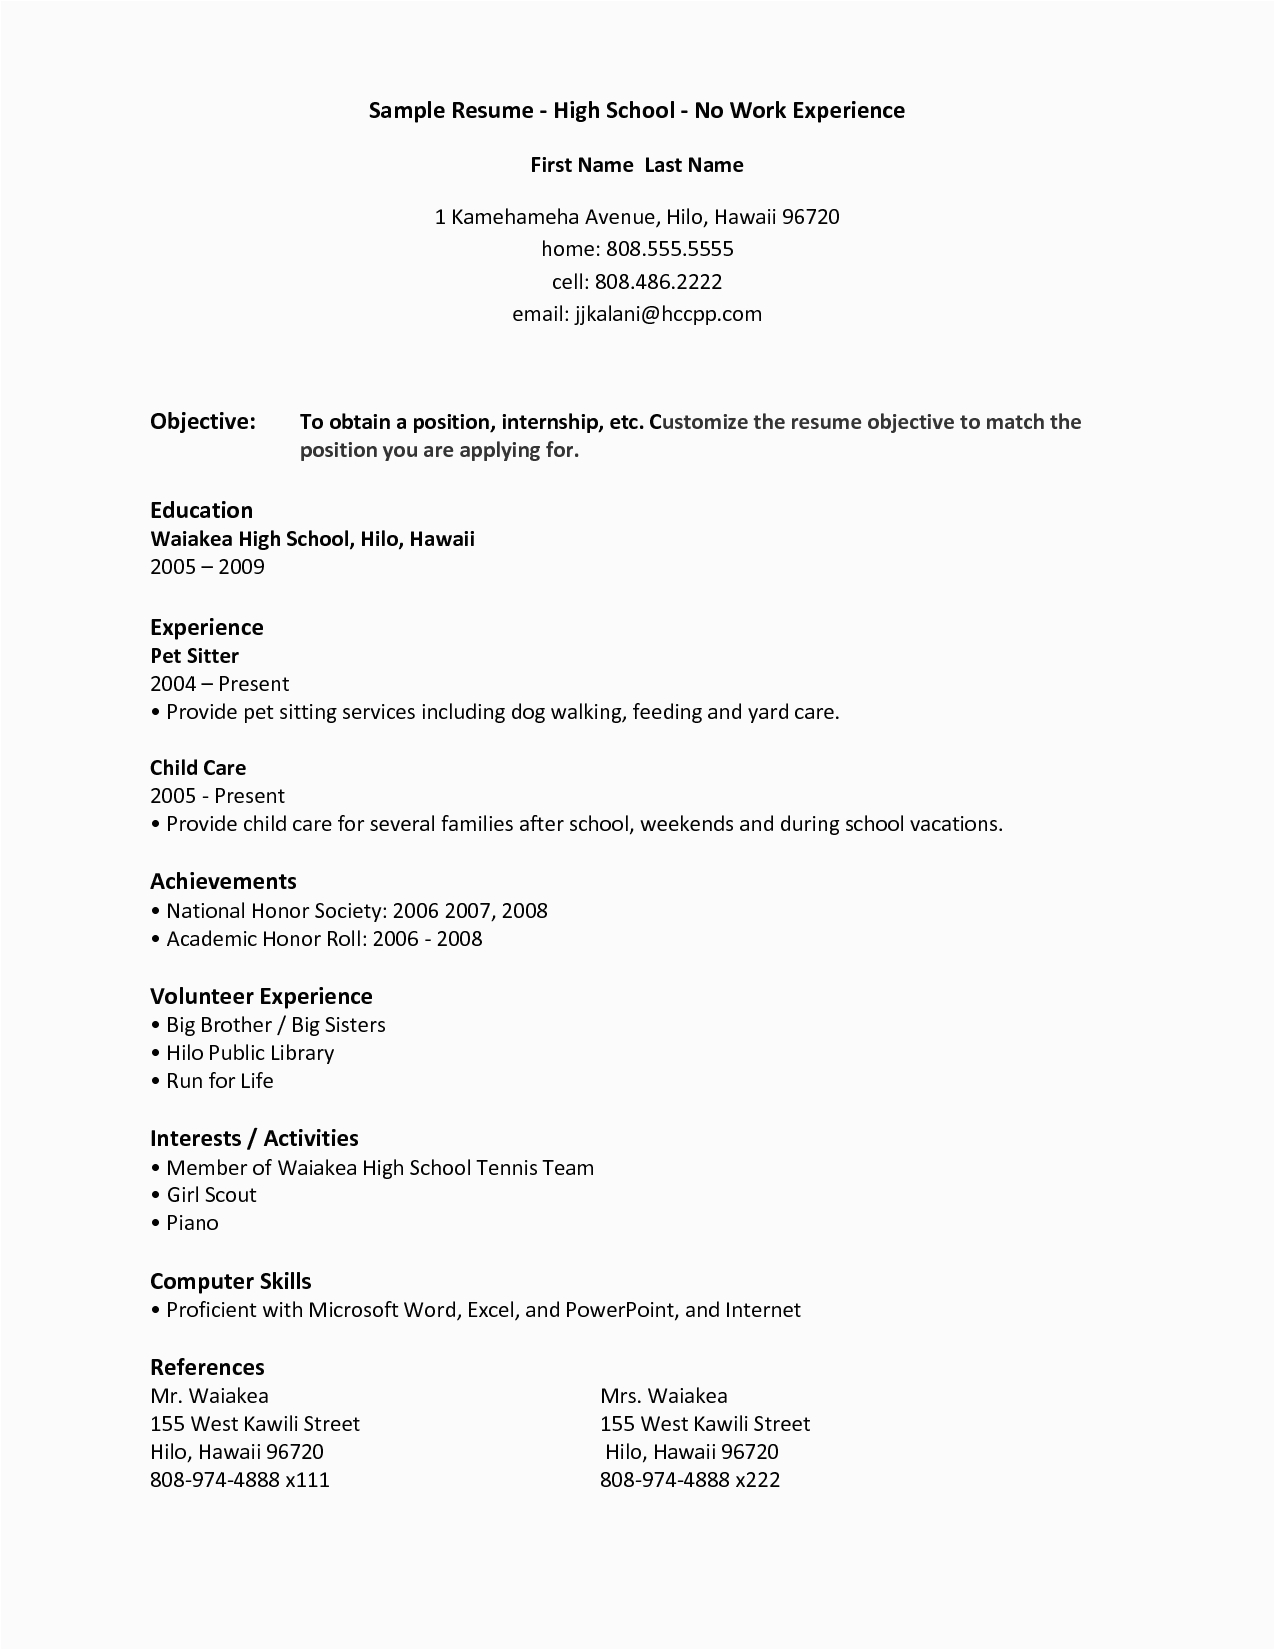 Sample Resume for High School Student No Experience Resume for Students with No Experience – Task List Templates